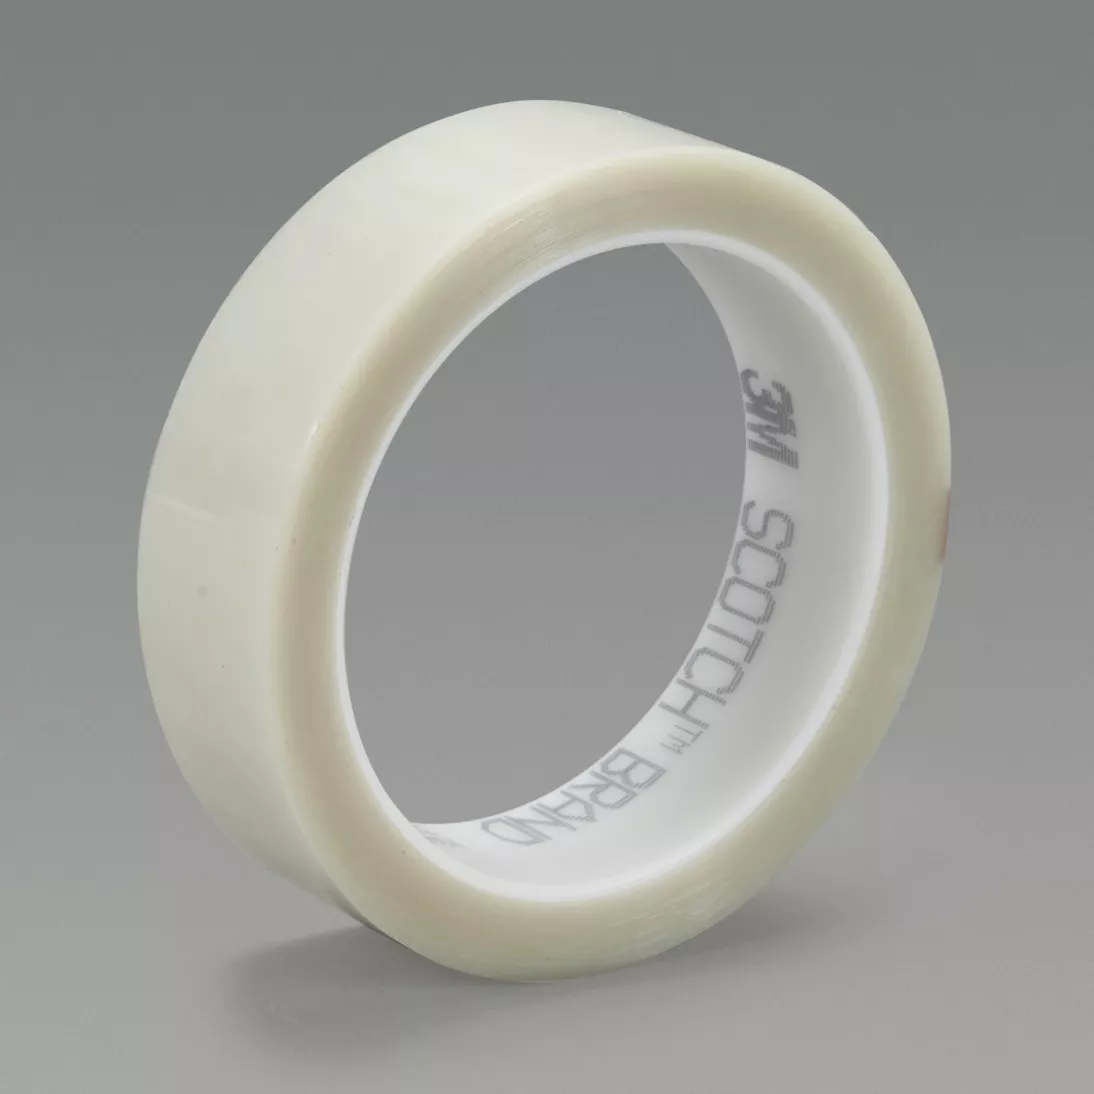 3M™ Edging and Reinforcing Tape 8411, Transparent, 1 in x 72 yd, 1.5 mil, 36 rolls per case